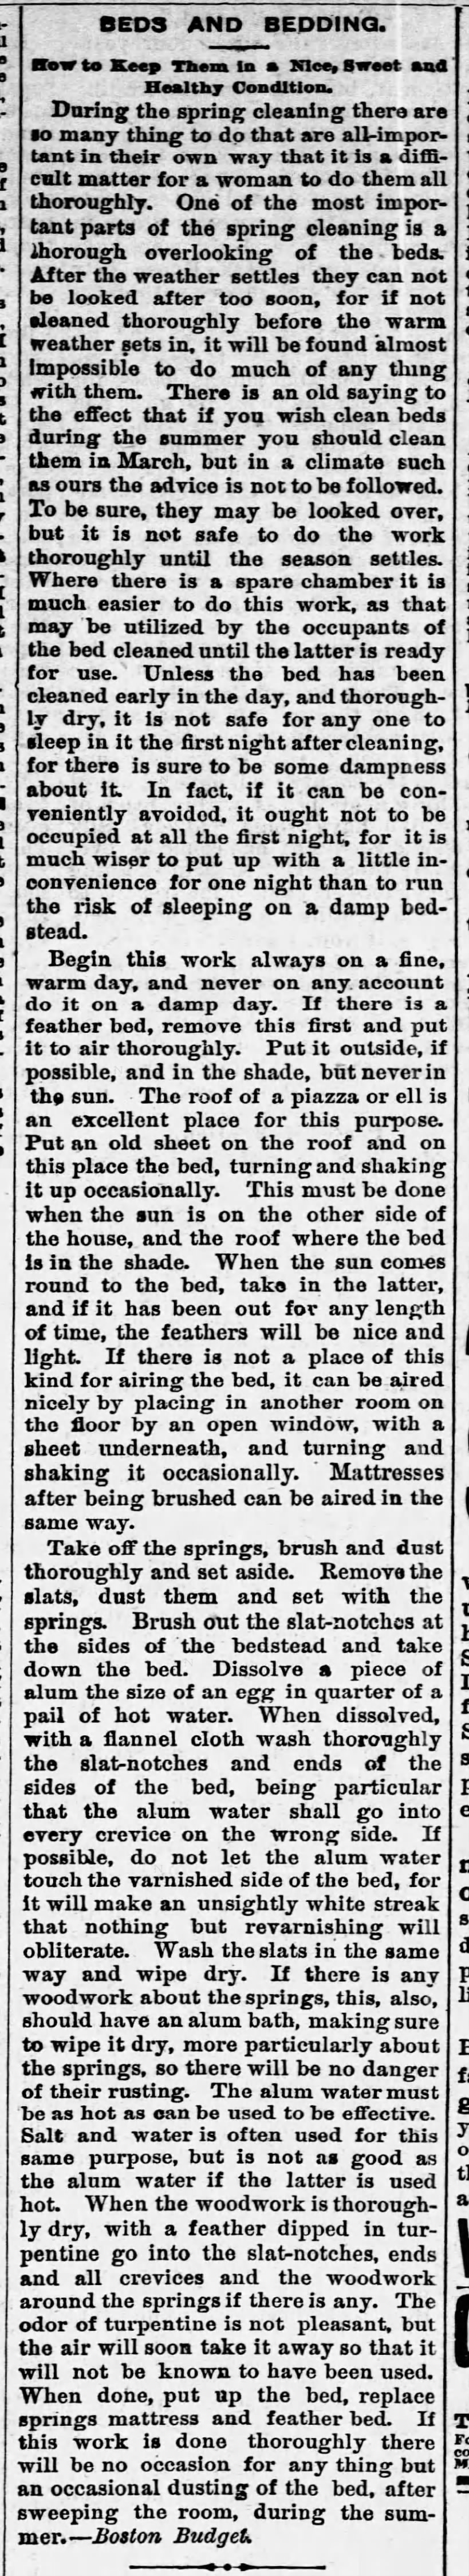 How to clean beds and bedding, 1888